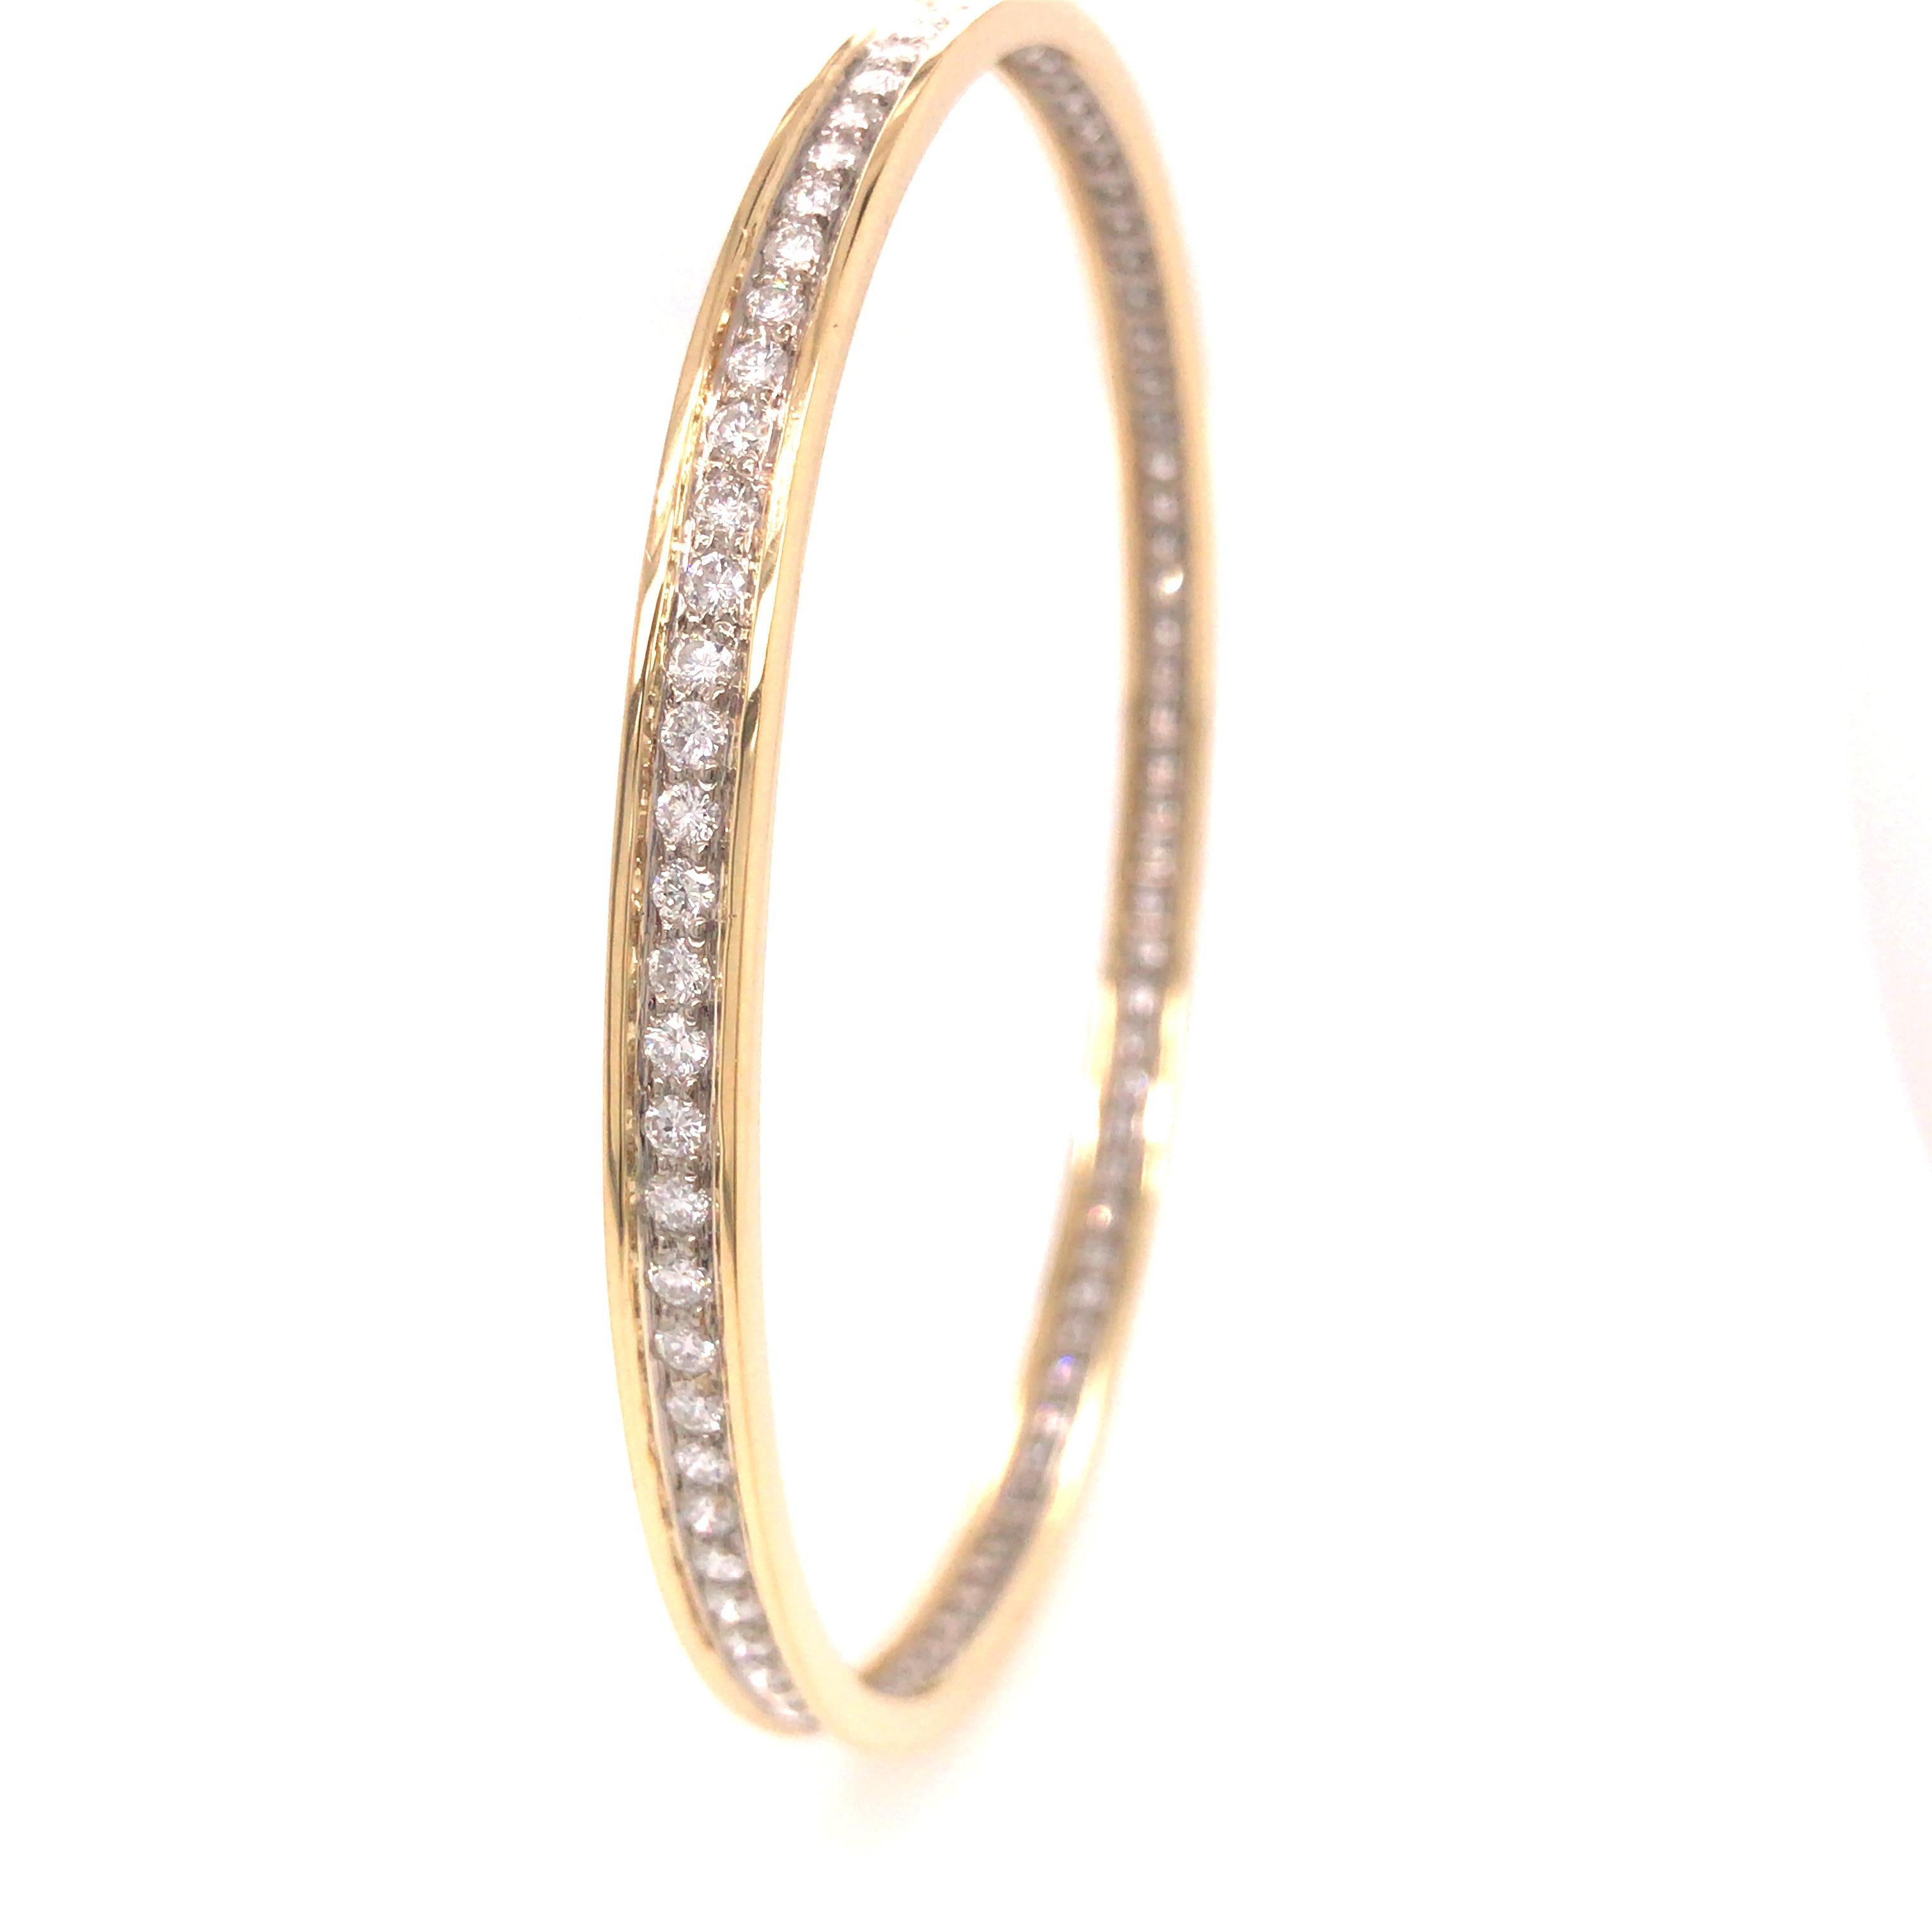 Round Diamond Handmade Bangle in 18K Yellow Gold and Platinum.  Round Brilliant Cut Diamonds weighing 3.50 carat total weight G-H in color and VS in clarity are expertly channel set.  The Bangle measures 7 3/4 inch in inner circumference and 3/18